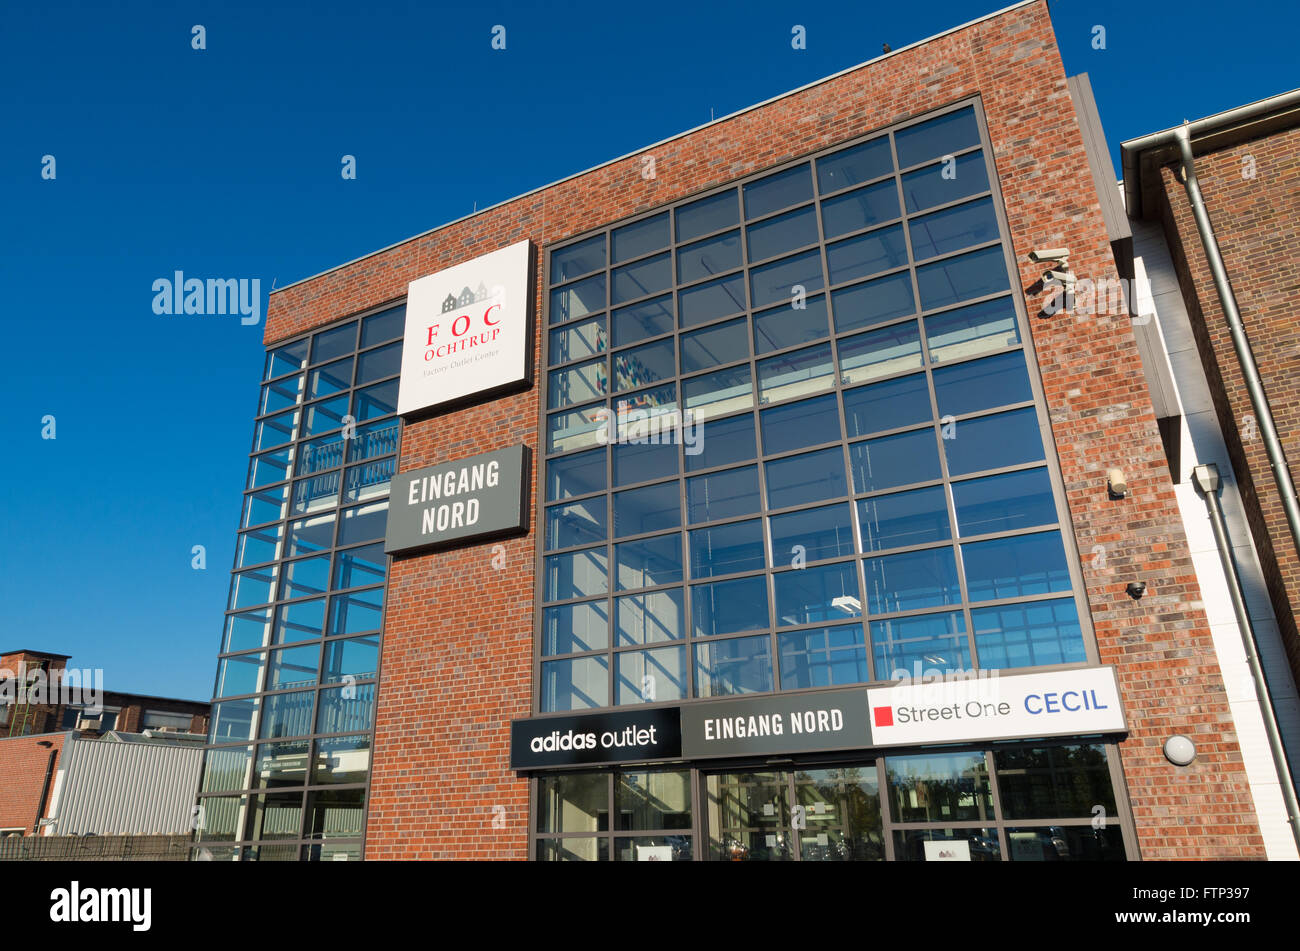 Adidas outlet center stock photography and images - Alamy